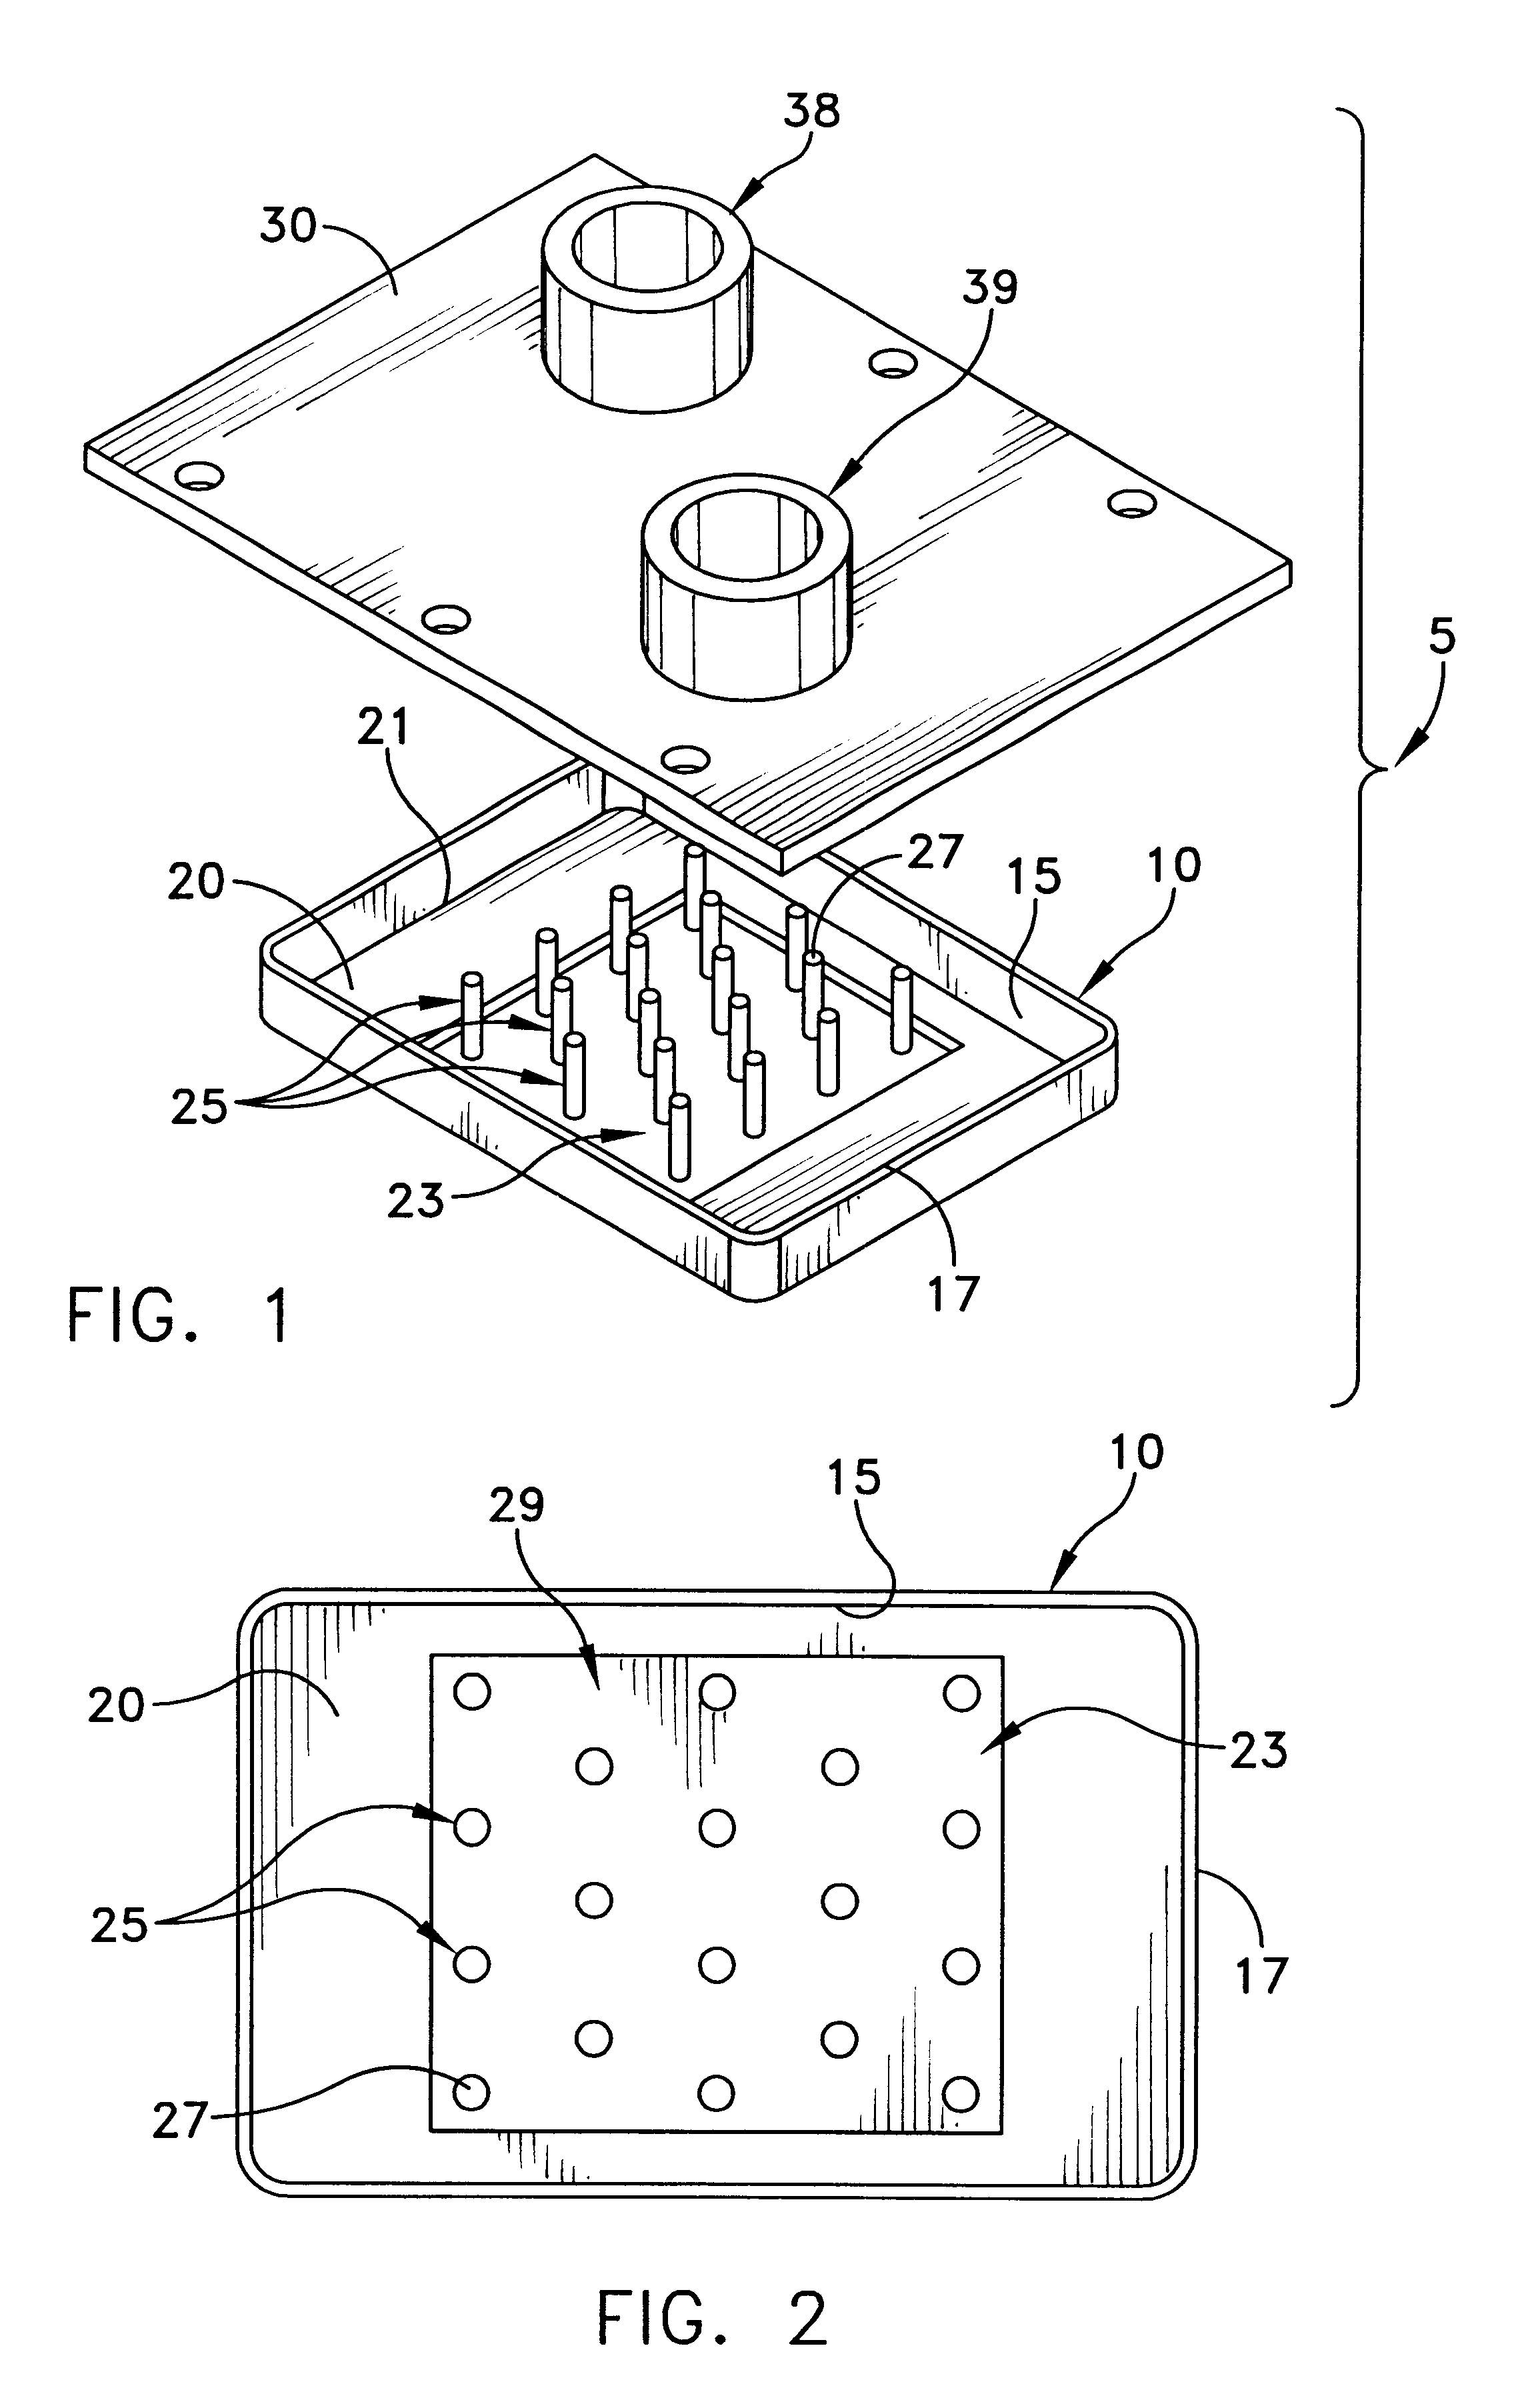 Liquid-cooled heat sink with thermal jacket